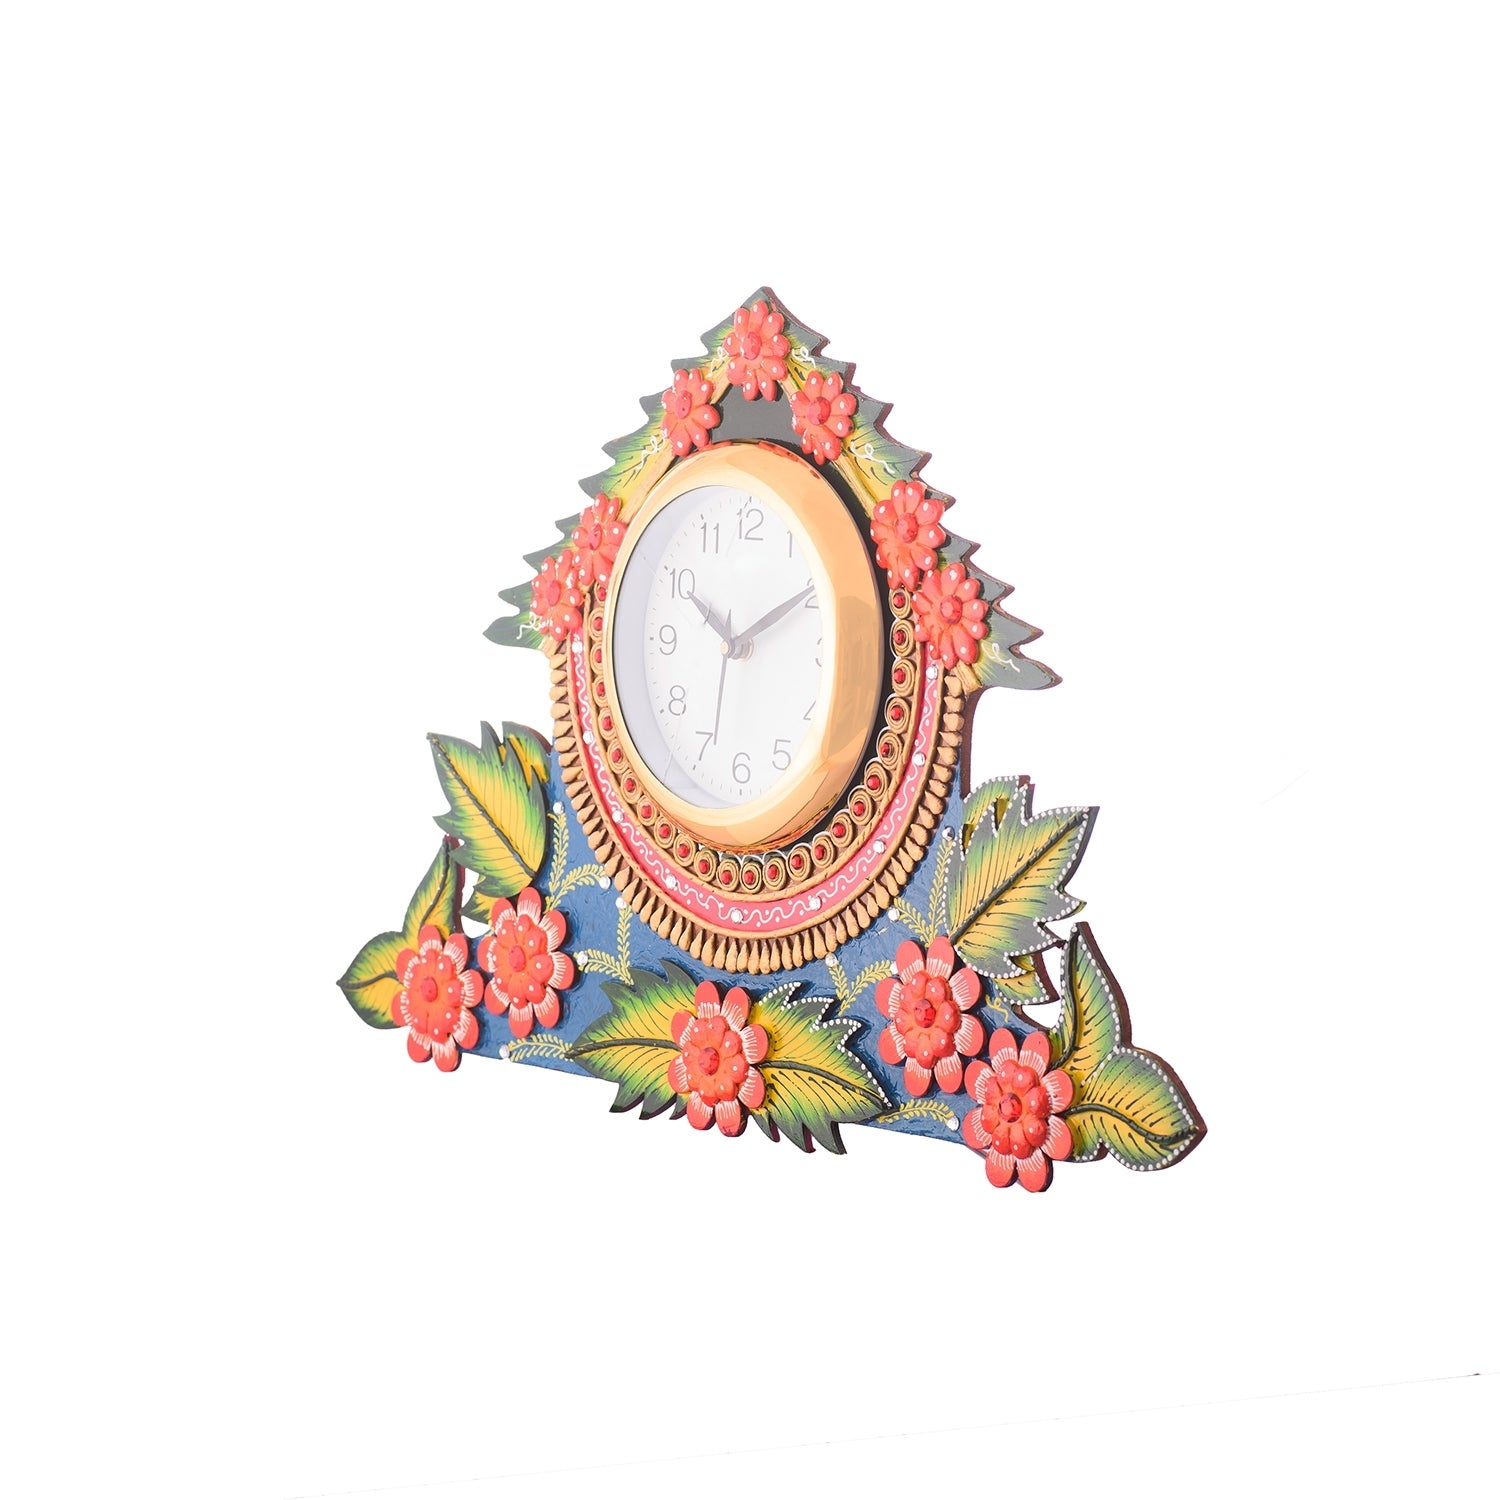 Splendid Floral Wooden Handcrafted Wooden Wall Clock (H - 19 Inch) 4